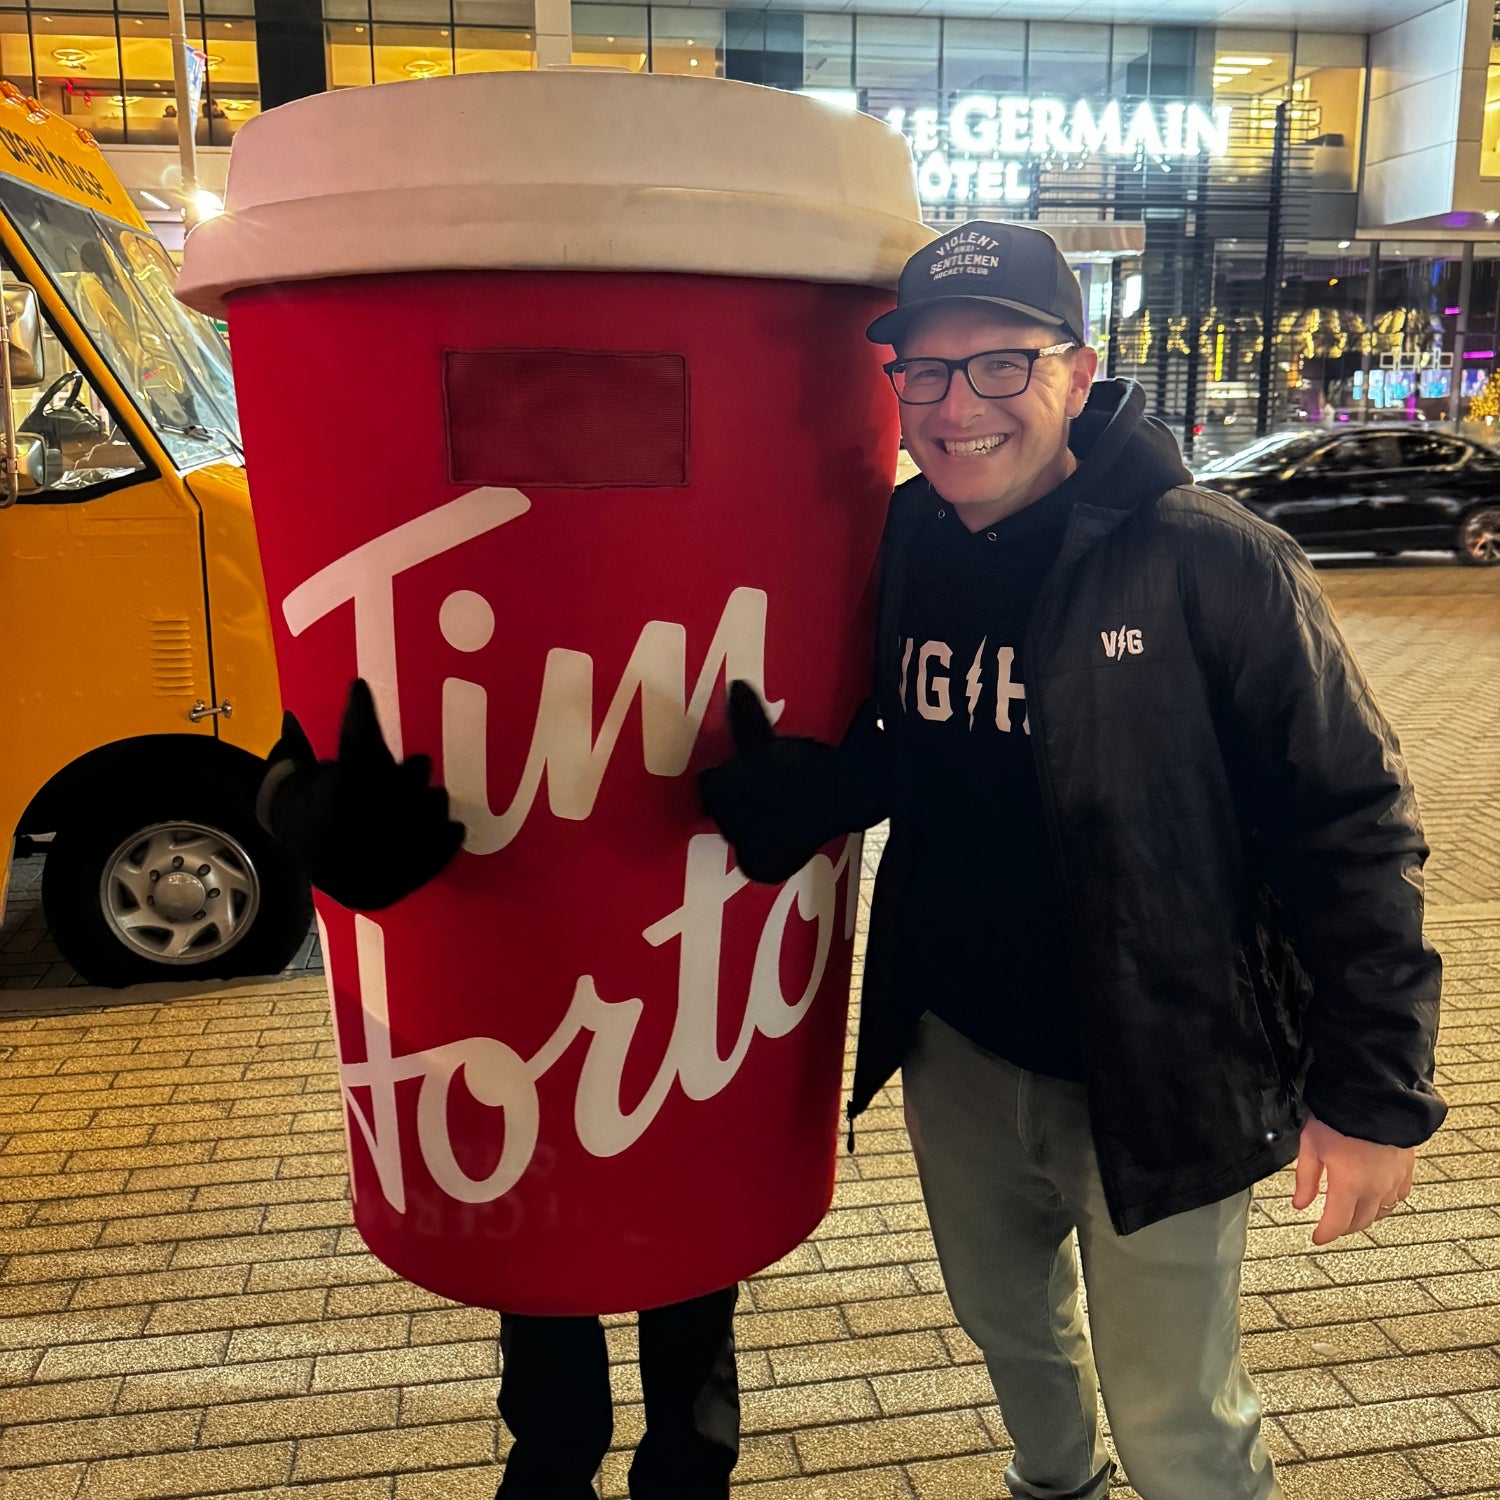 We sent some of the crew out to Toronto a few weeks ago to check out the NHL All Star game for some work and play. Safe to say the trip did not disappoint! Lifetipsforbetterliving's very own "dad" reflects back on his trip to share some of the highlights. Check it out!